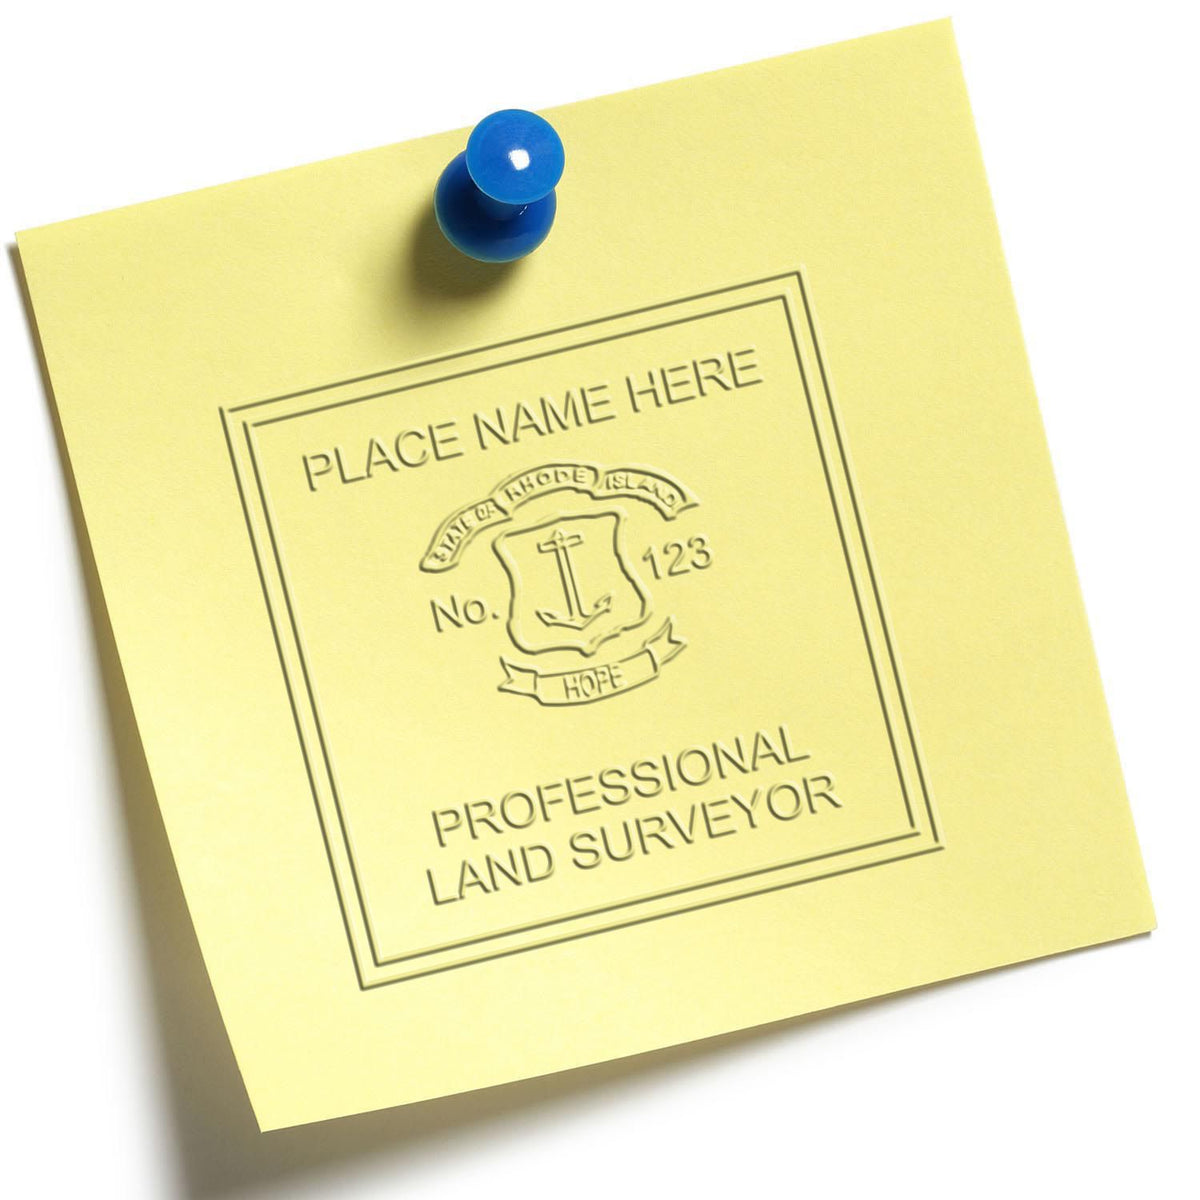 An alternative view of the Hybrid Rhode Island Land Surveyor Seal stamped on a sheet of paper showing the image in use